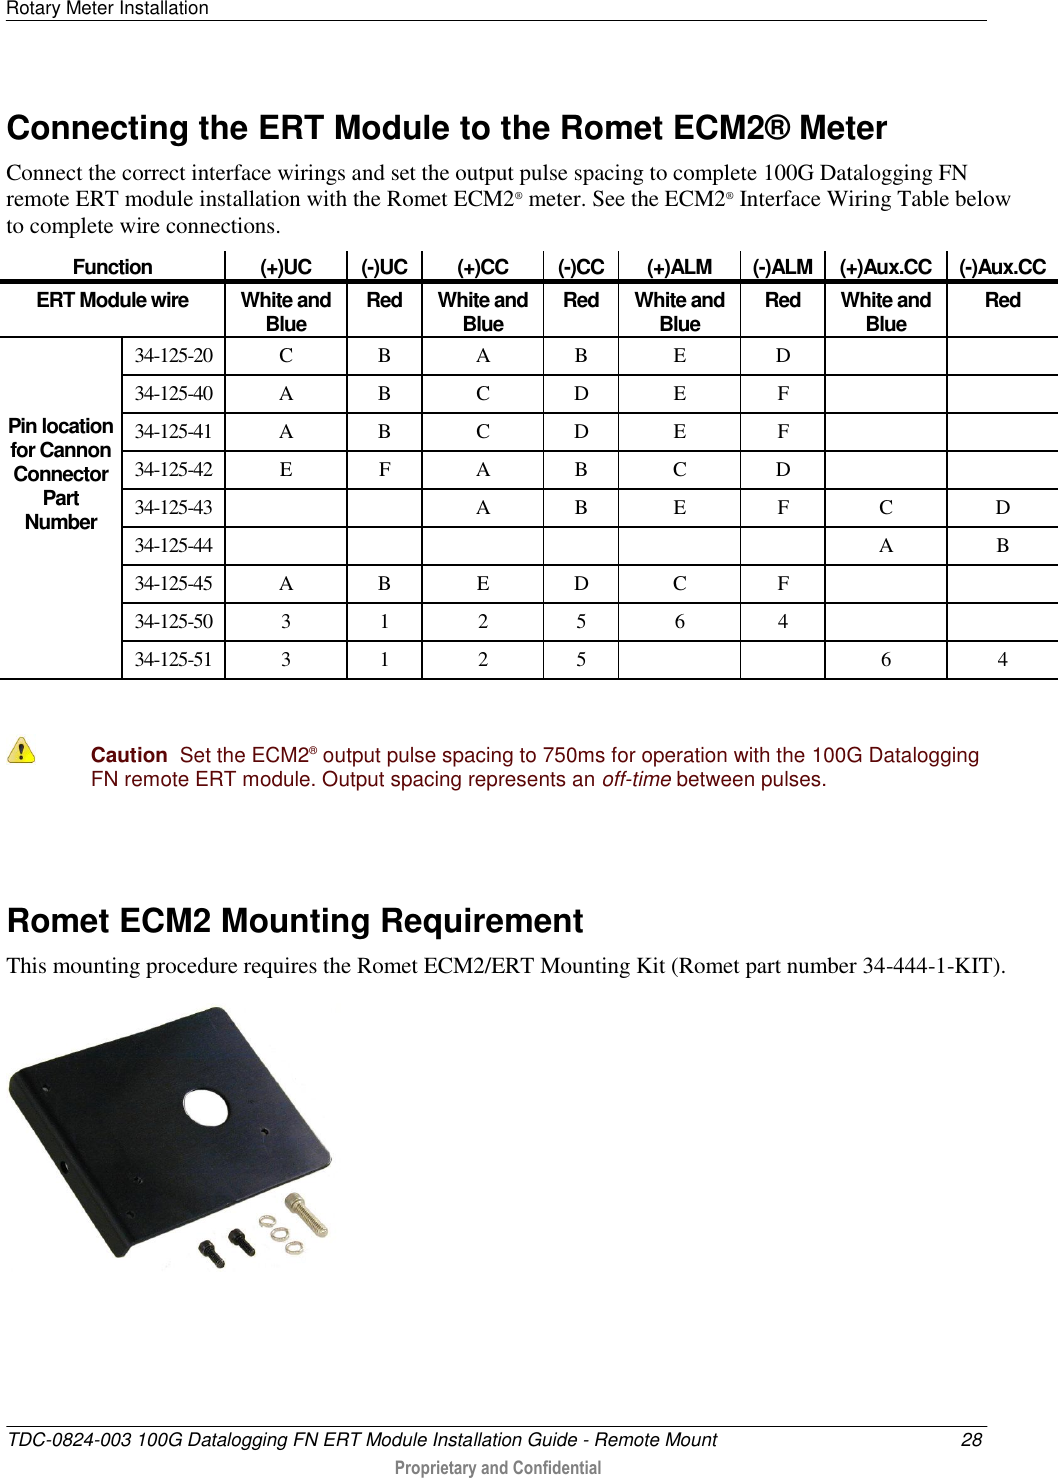 Rotary Meter Installation   TDC-0824-003 100G Datalogging FN ERT Module Installation Guide - Remote Mount  28  Proprietary and Confidential    Connecting the ERT Module to the Romet ECM2® Meter Connect the correct interface wirings and set the output pulse spacing to complete 100G Datalogging FN remote ERT module installation with the Romet ECM2® meter. See the ECM2® Interface Wiring Table below to complete wire connections. Function (+)UC (-)UC (+)CC (-)CC (+)ALM (-)ALM (+)Aux.CC (-)Aux.CC ERT Module wire White and Blue Red White and Blue Red White and Blue Red White and Blue Red   Pin location for Cannon Connector Part Number 34-125-20 C B A B E D   34-125-40 A B C D E F   34-125-41 A B C D E F   34-125-42 E F A B C D   34-125-43   A B E F C D 34-125-44       A B 34-125-45 A B E D C F   34-125-50 3 1 2 5 6 4   34-125-51 3 1 2 5   6 4   Caution  Set the ECM2® output pulse spacing to 750ms for operation with the 100G Datalogging FN remote ERT module. Output spacing represents an off-time between pulses.    Romet ECM2 Mounting Requirement This mounting procedure requires the Romet ECM2/ERT Mounting Kit (Romet part number 34-444-1-KIT).    